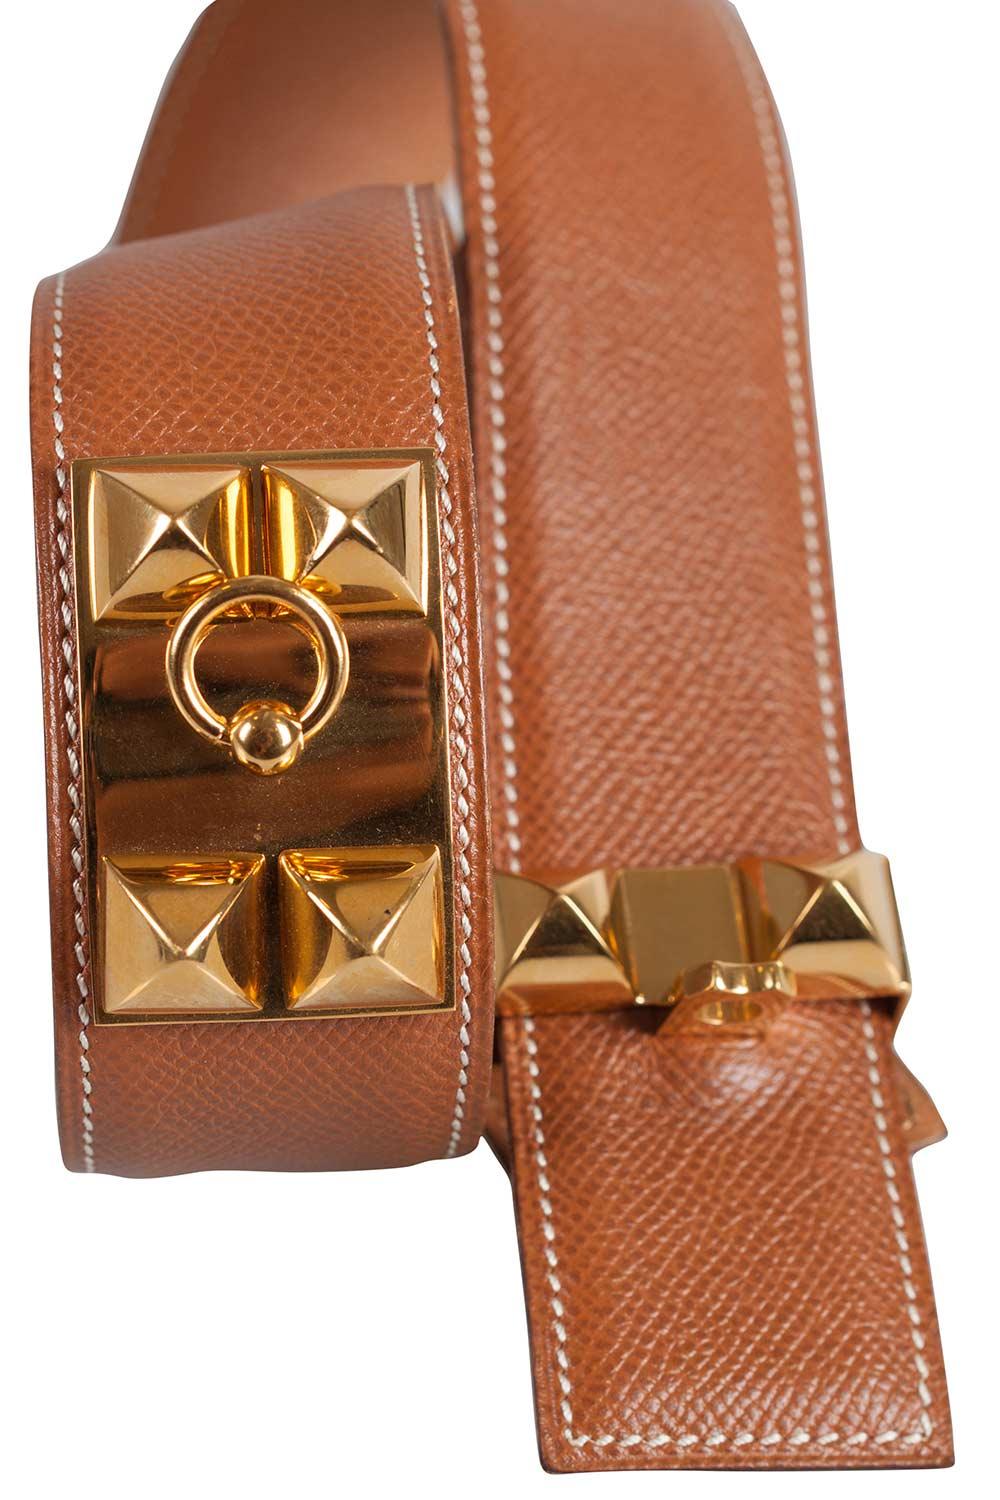 Crafted from Courchevel leather, this belt is a must have for every fashionista. The gorgeous design and craftsmanship of this belt makes it ideal for everyday wear and makes it the perfect accessory for just about any outfit. The gold-tone Collier